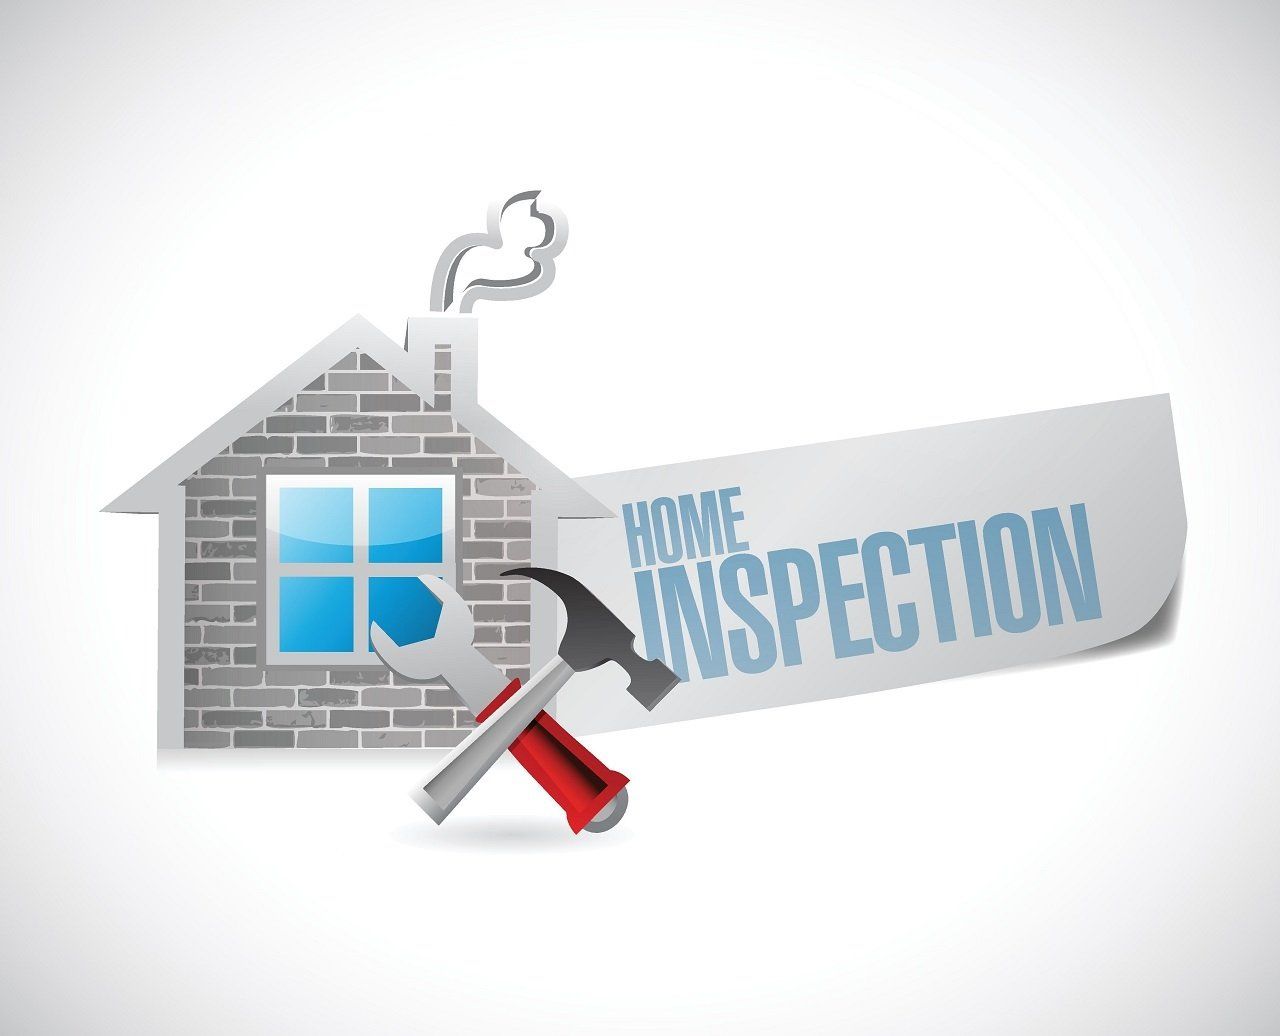 5 Additional Ways To Grow Your Home Inspection Business